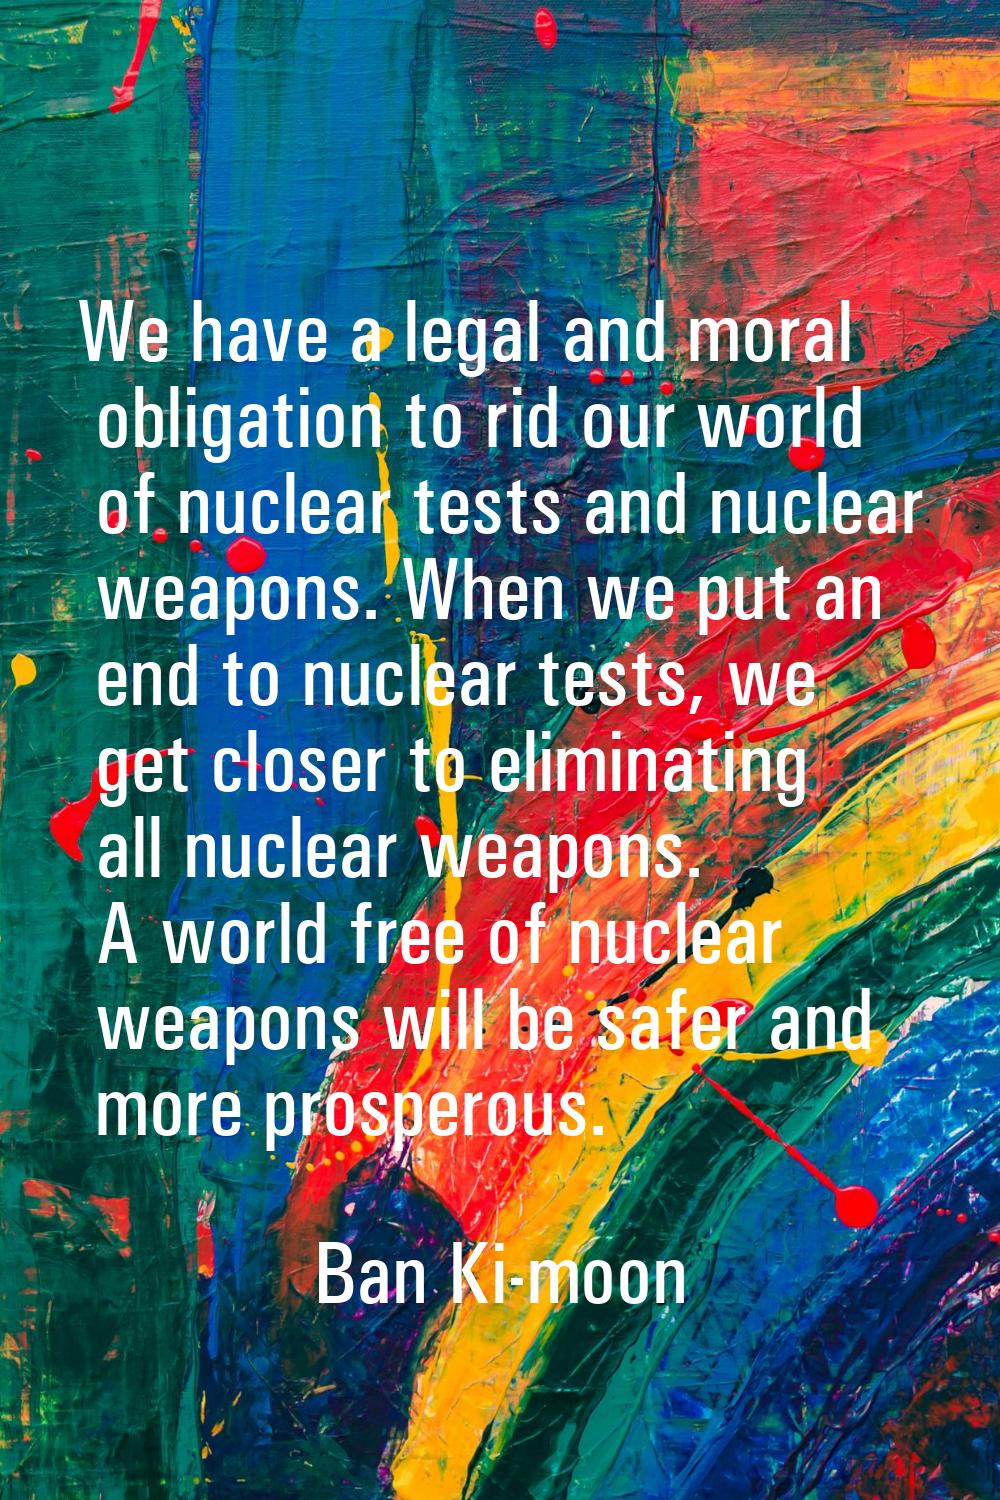 We have a legal and moral obligation to rid our world of nuclear tests and nuclear weapons. When we